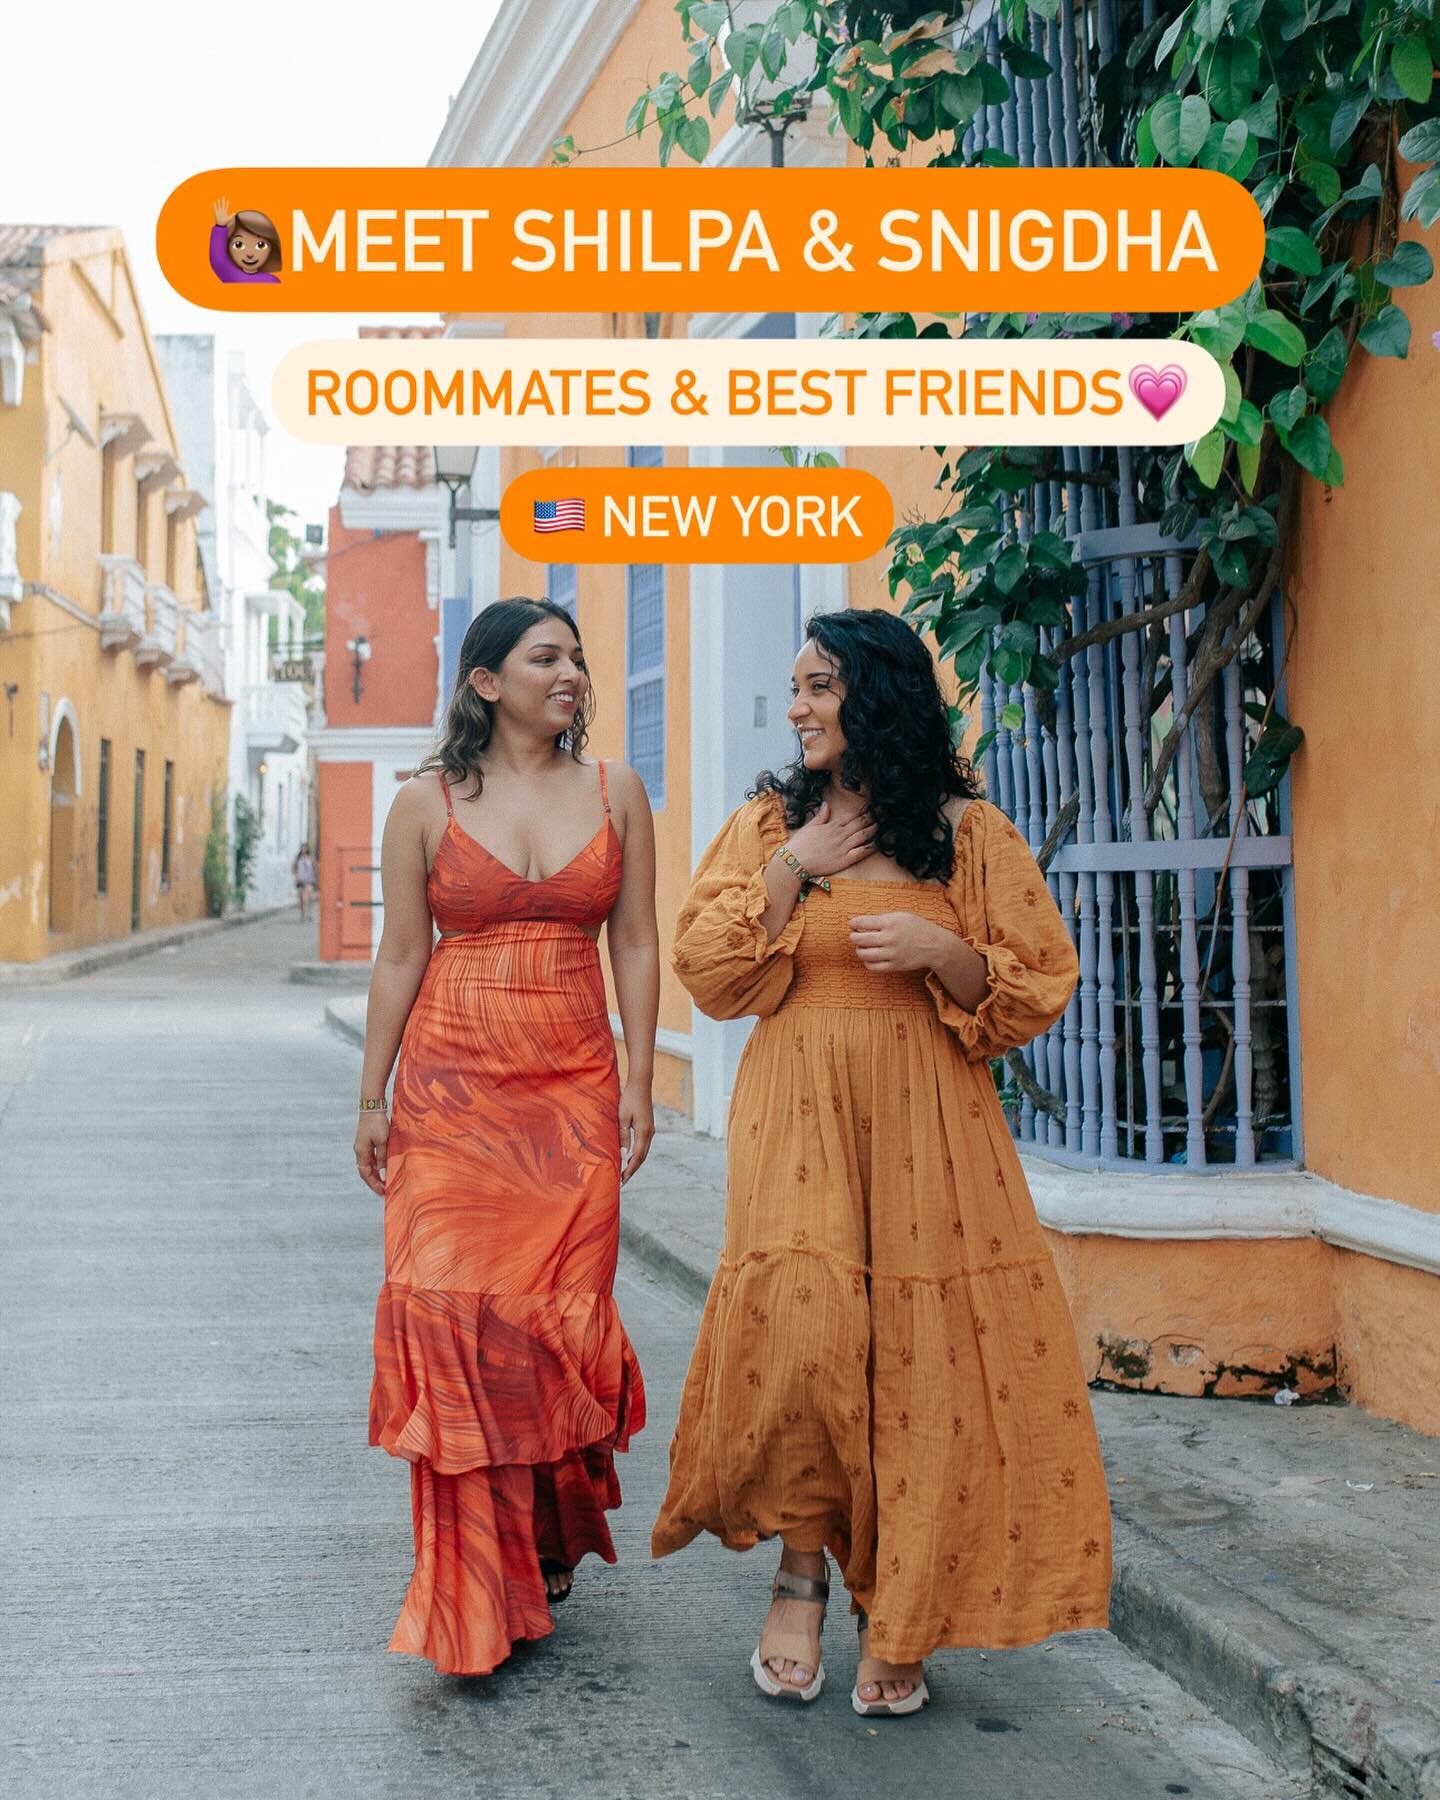 🧡Meet Our Travellers🧡

🙋🏽&zwj;♀️Hi! Shilpa and Snigdha here &mdash; best friends, roommates and travel buddies! We&rsquo;re originally from California but we live in New York and have traveled together from LA to London to Brussels to Amsterdam a